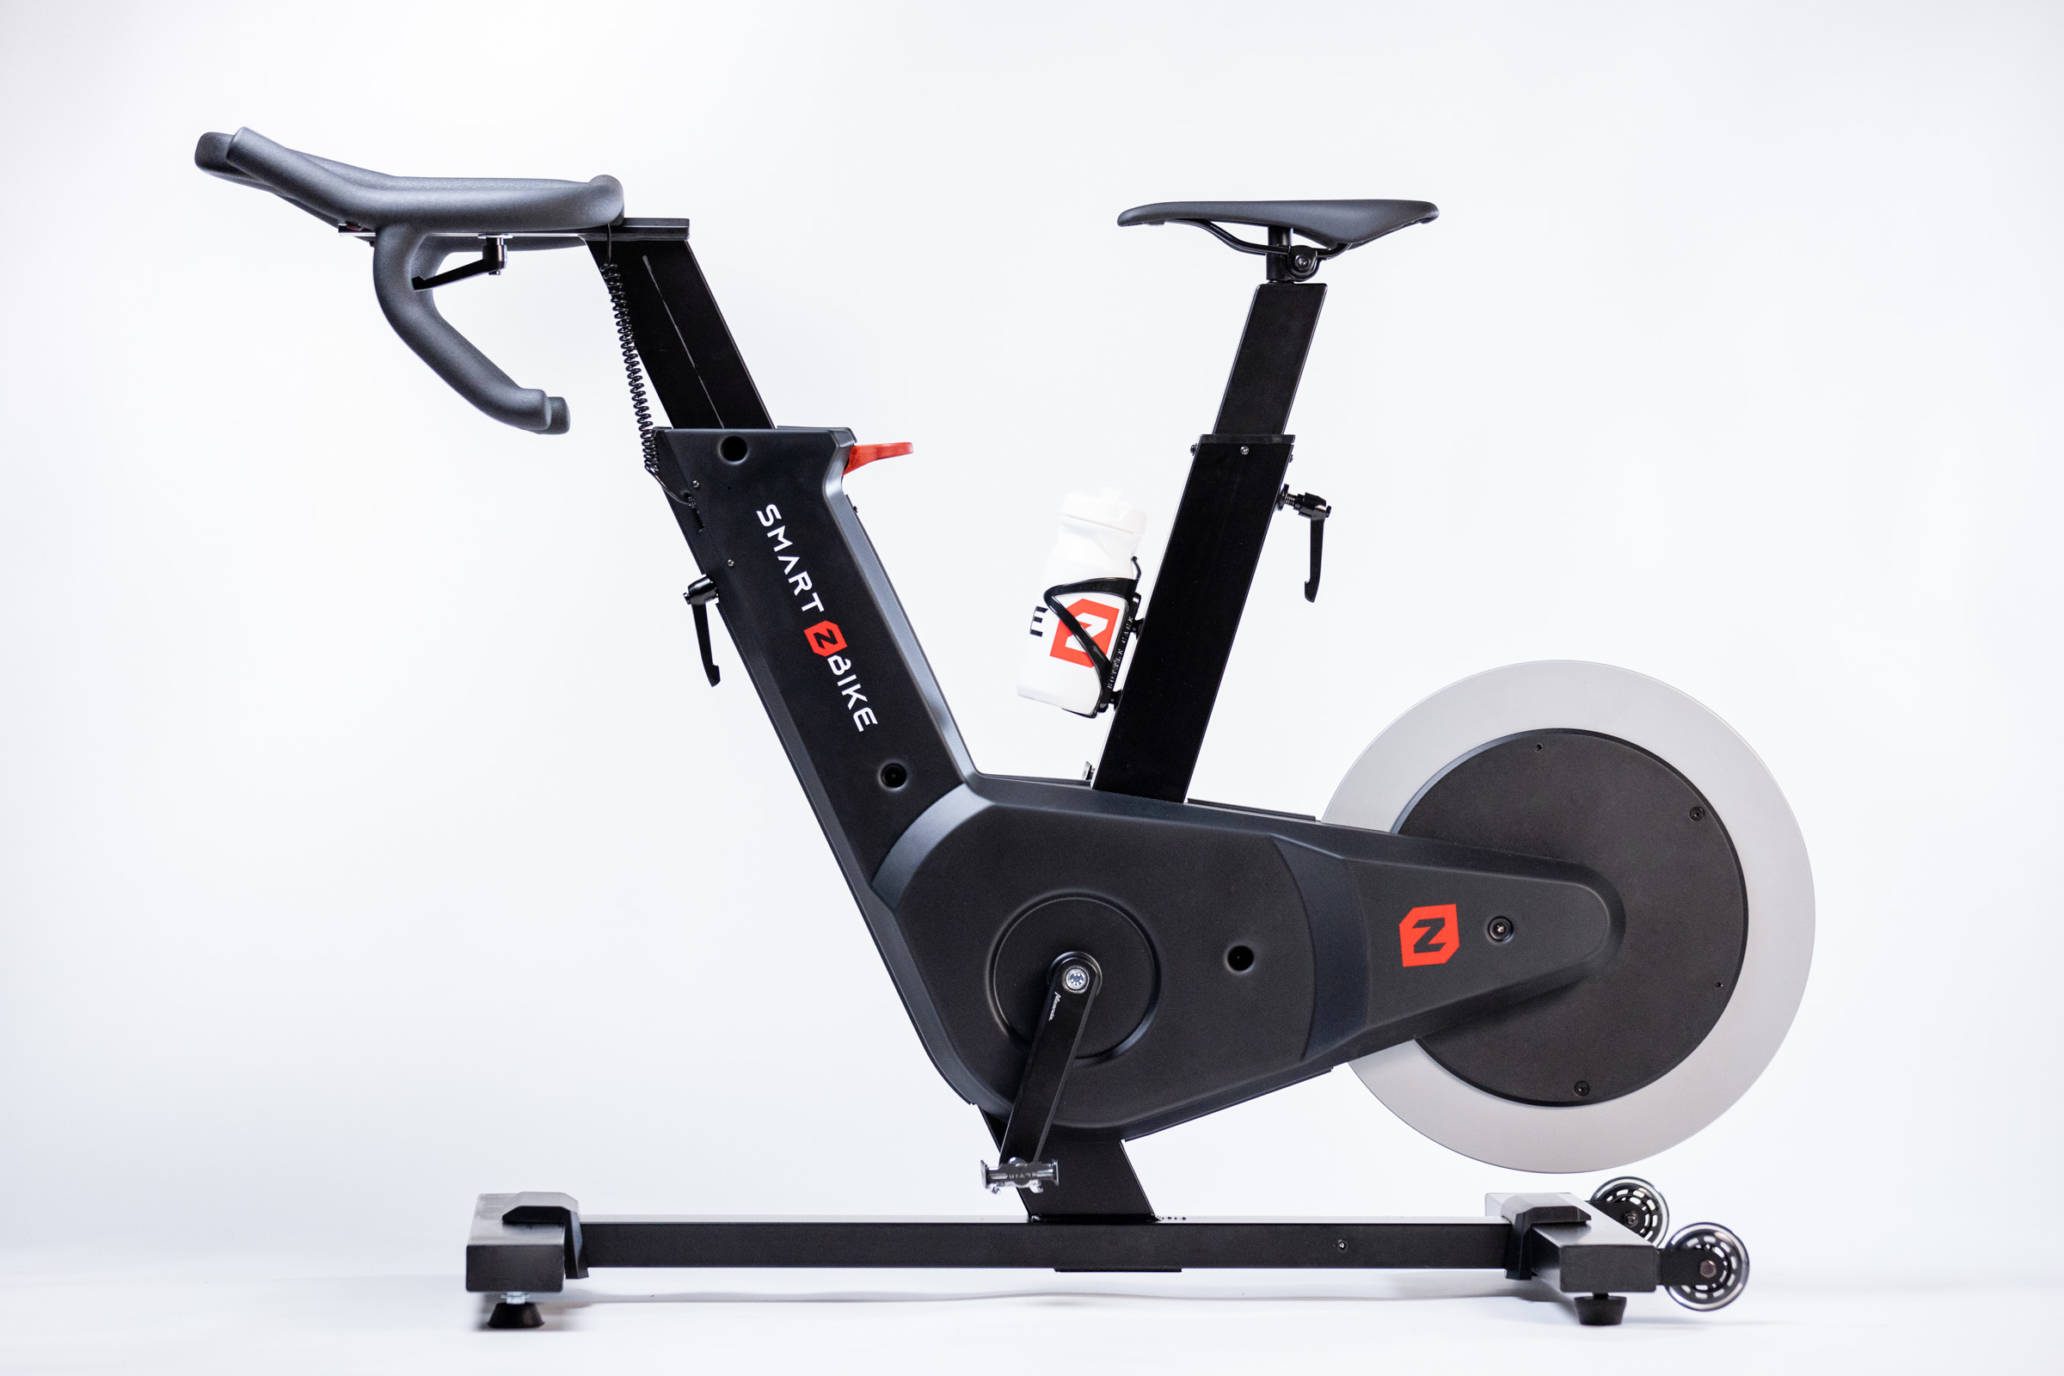 Decimale rook Mens Spinfiets - Zycle ZBike Smartbike | Fitnessking